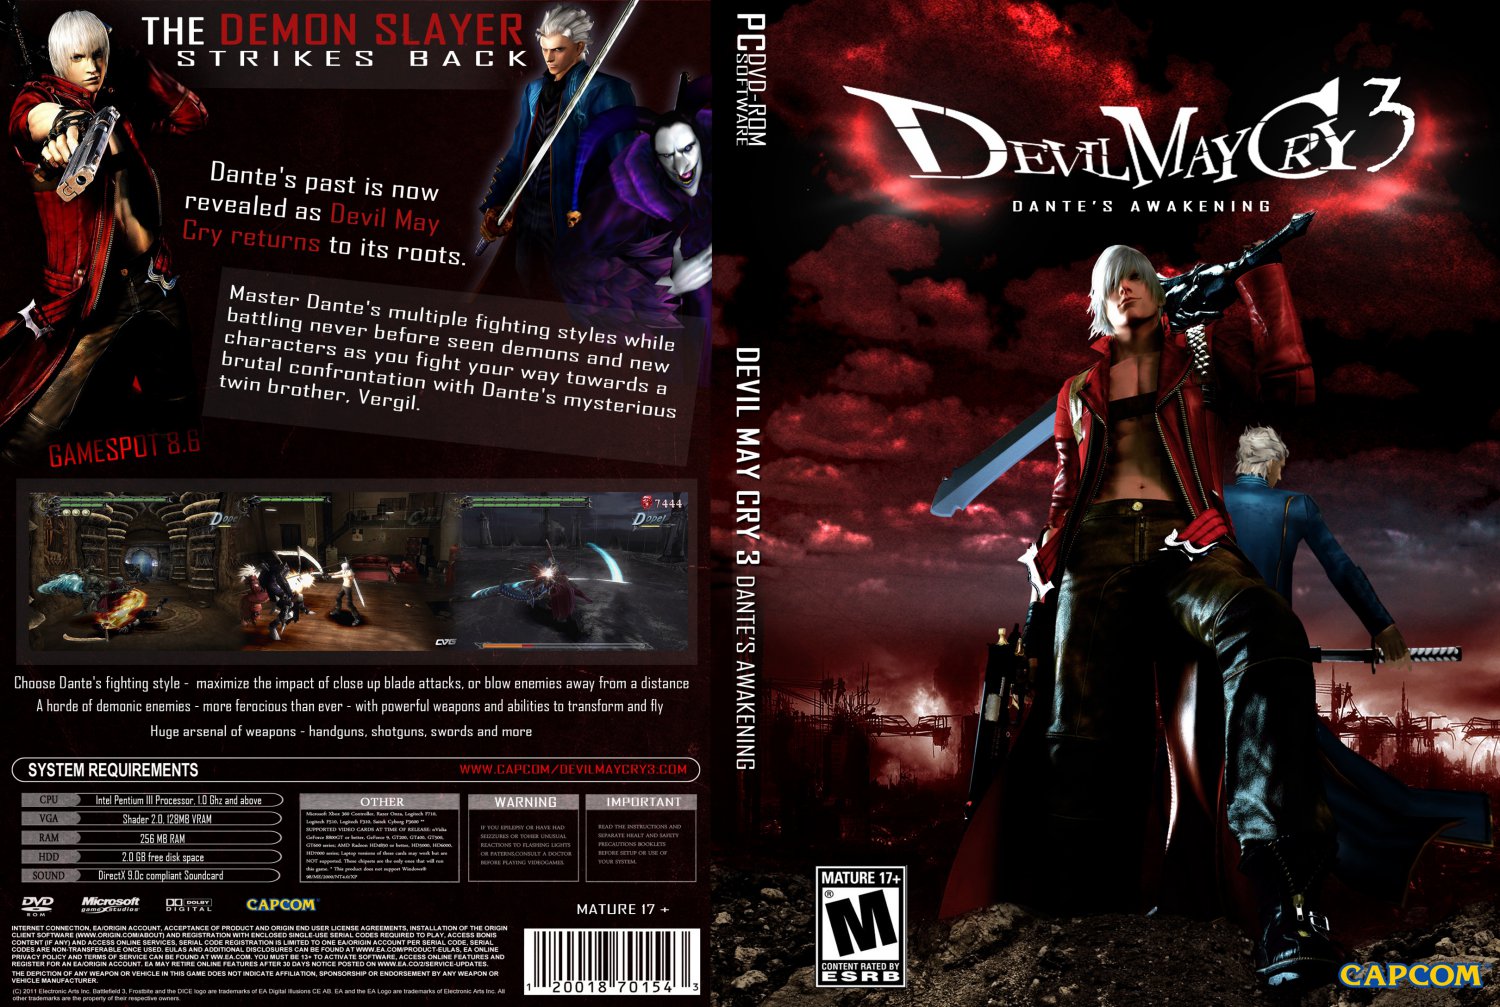 Devil may cry 3 can find steam фото 66